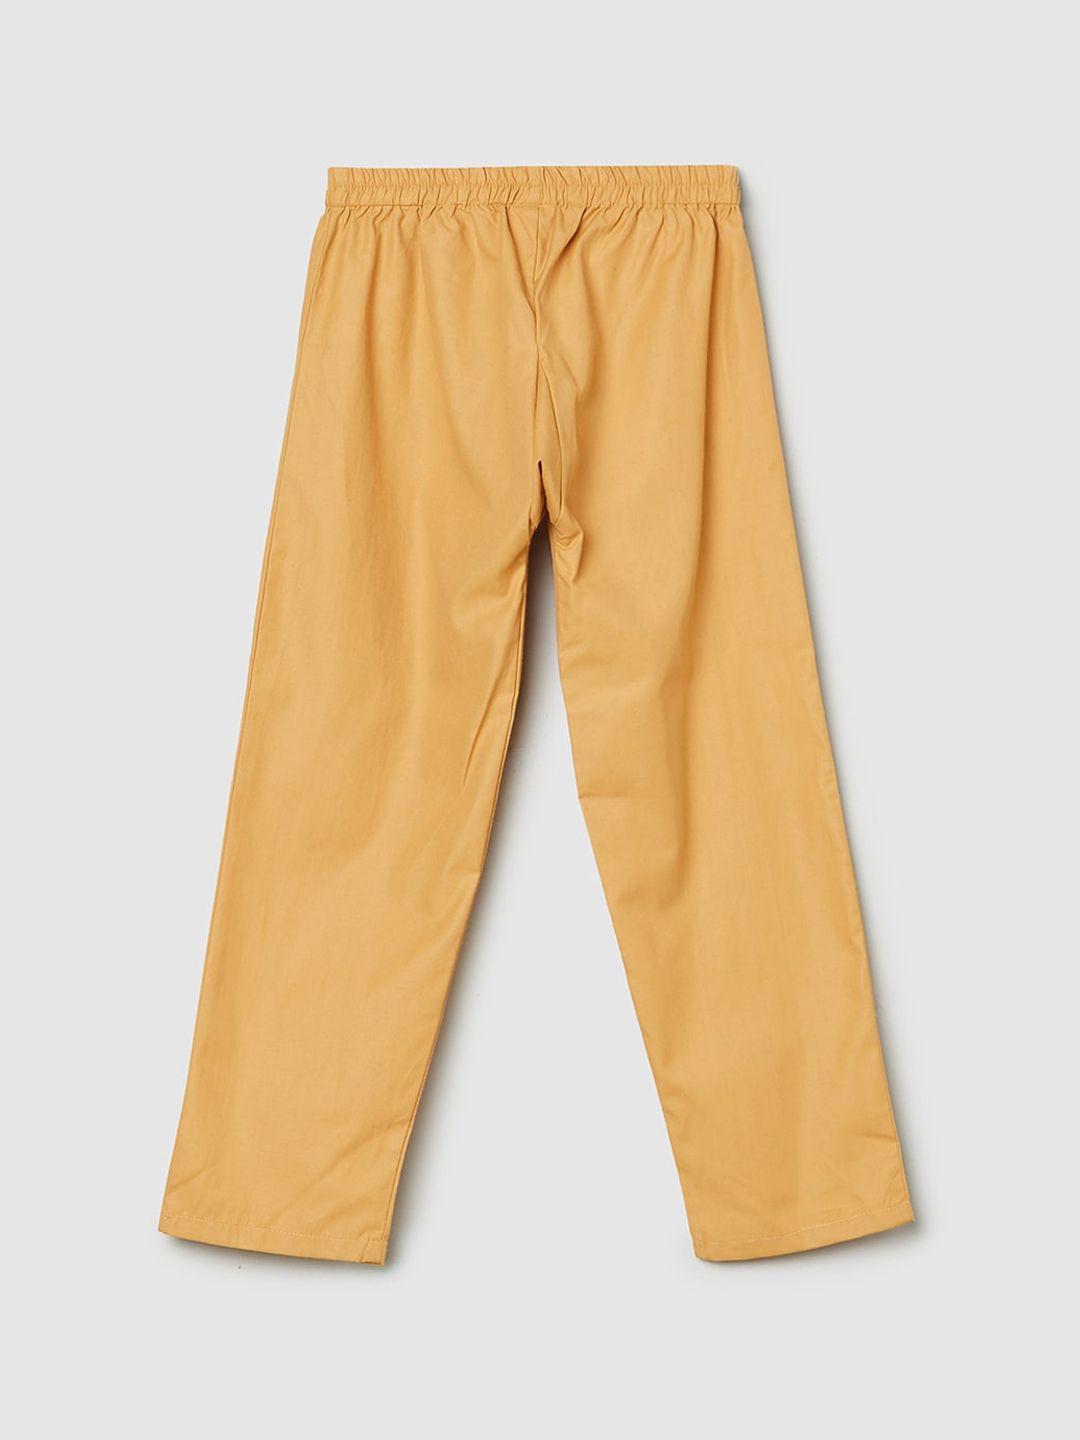 max boys beige-colored solid lounge pants